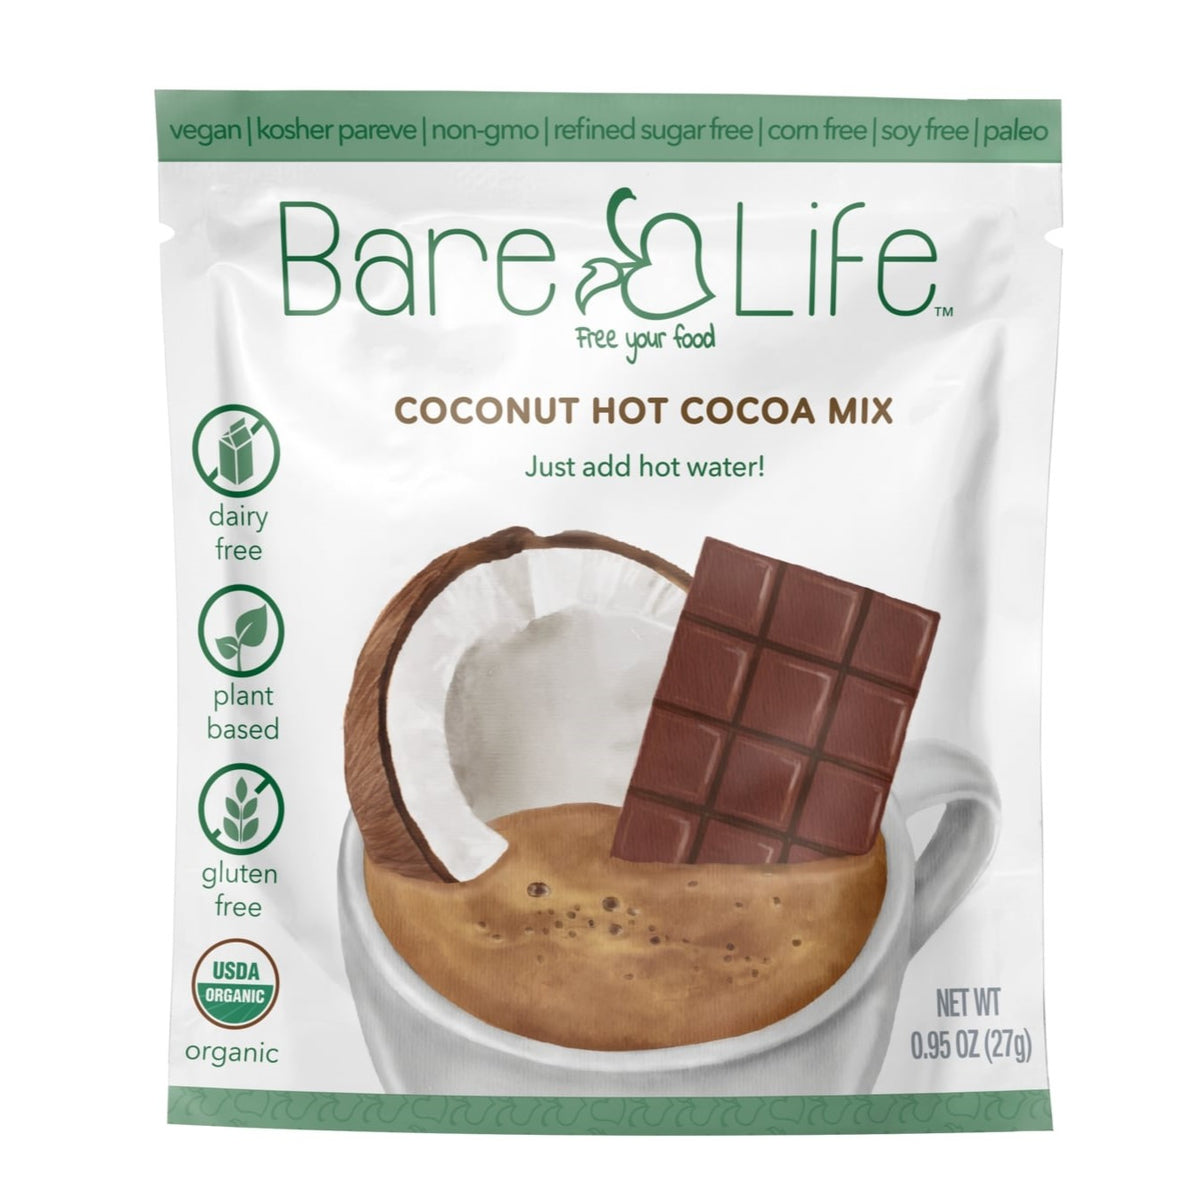 Bare Life Dairy Free Vegan Gluten Free Coconut Hot Cocoa Single Serving Pack Front